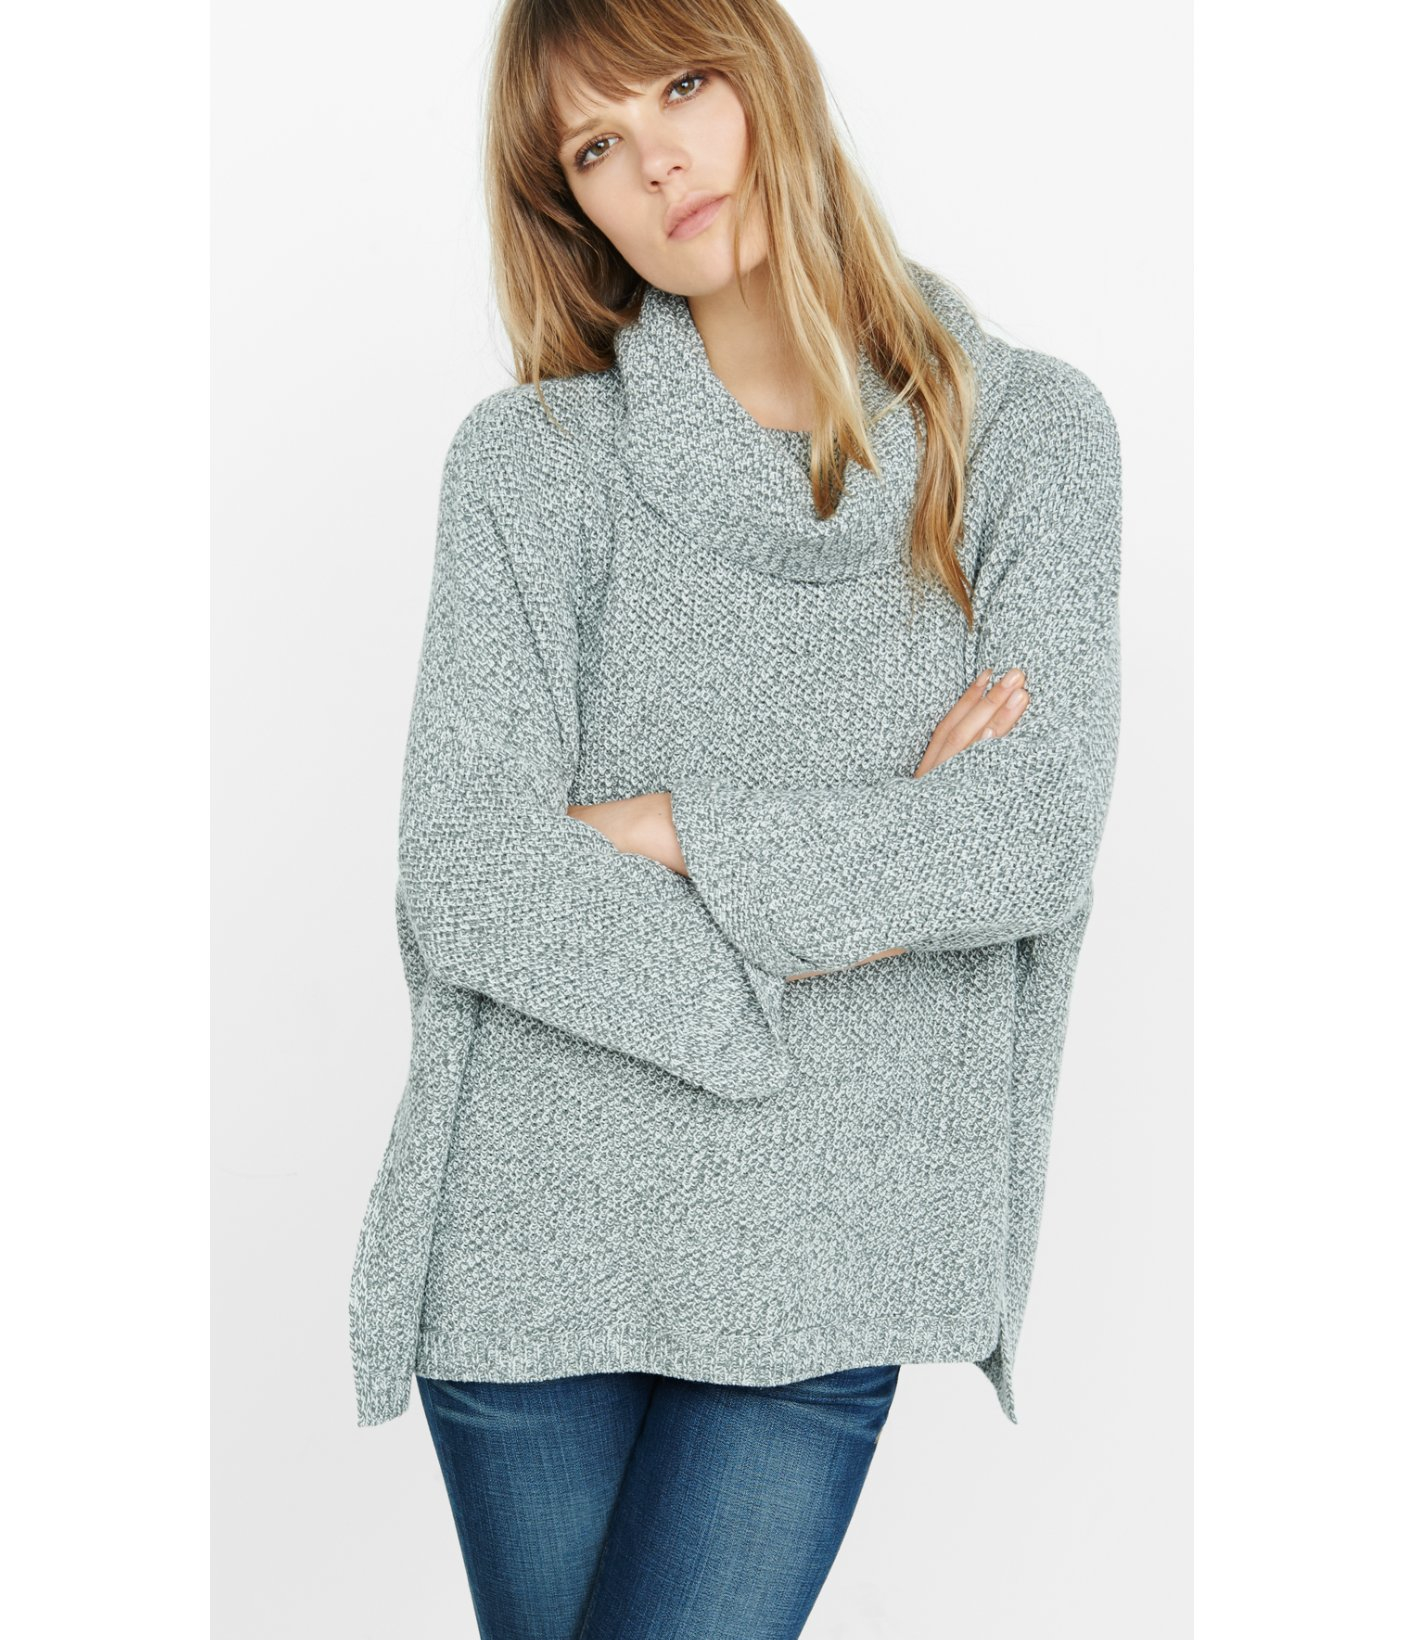 Express Marl Cowl Neck Boxy Sweater in Blue | Lyst